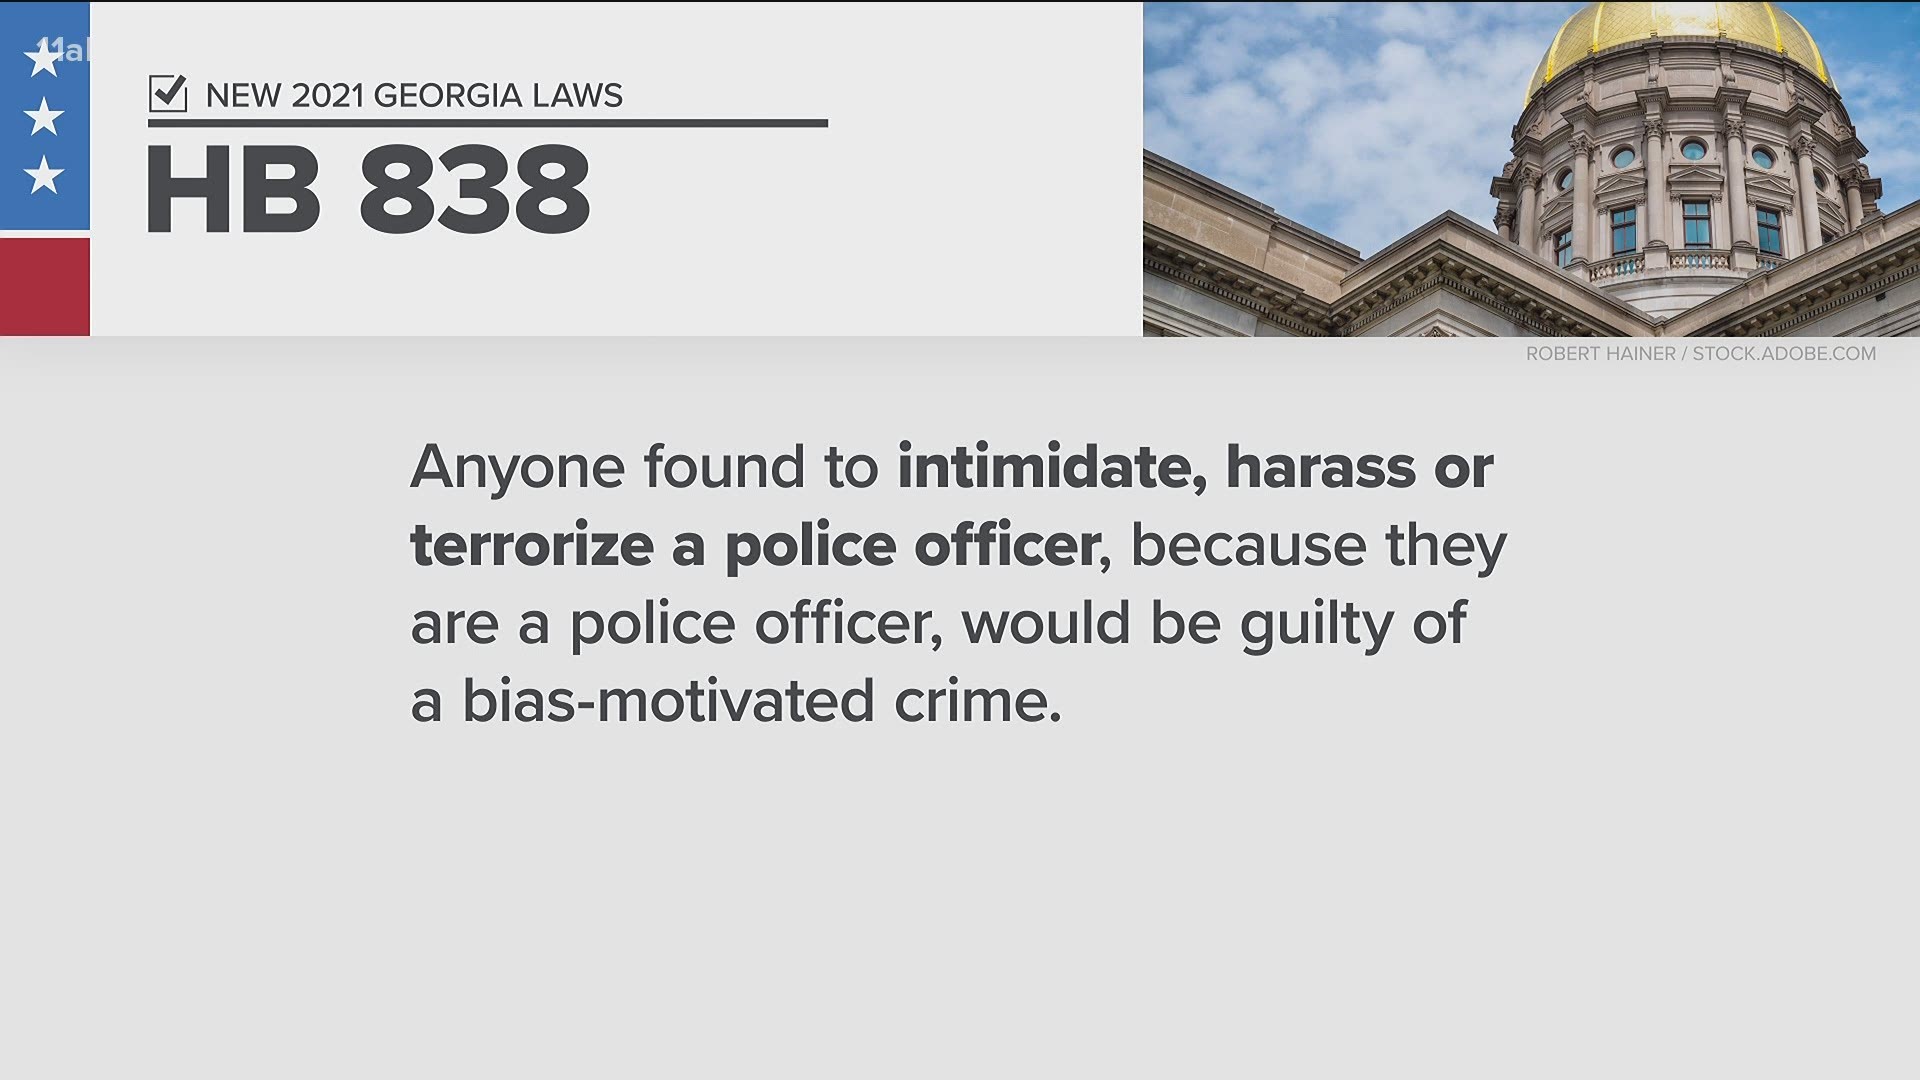 The "Police Hate Crimes Bill" is one of the most notable ones.